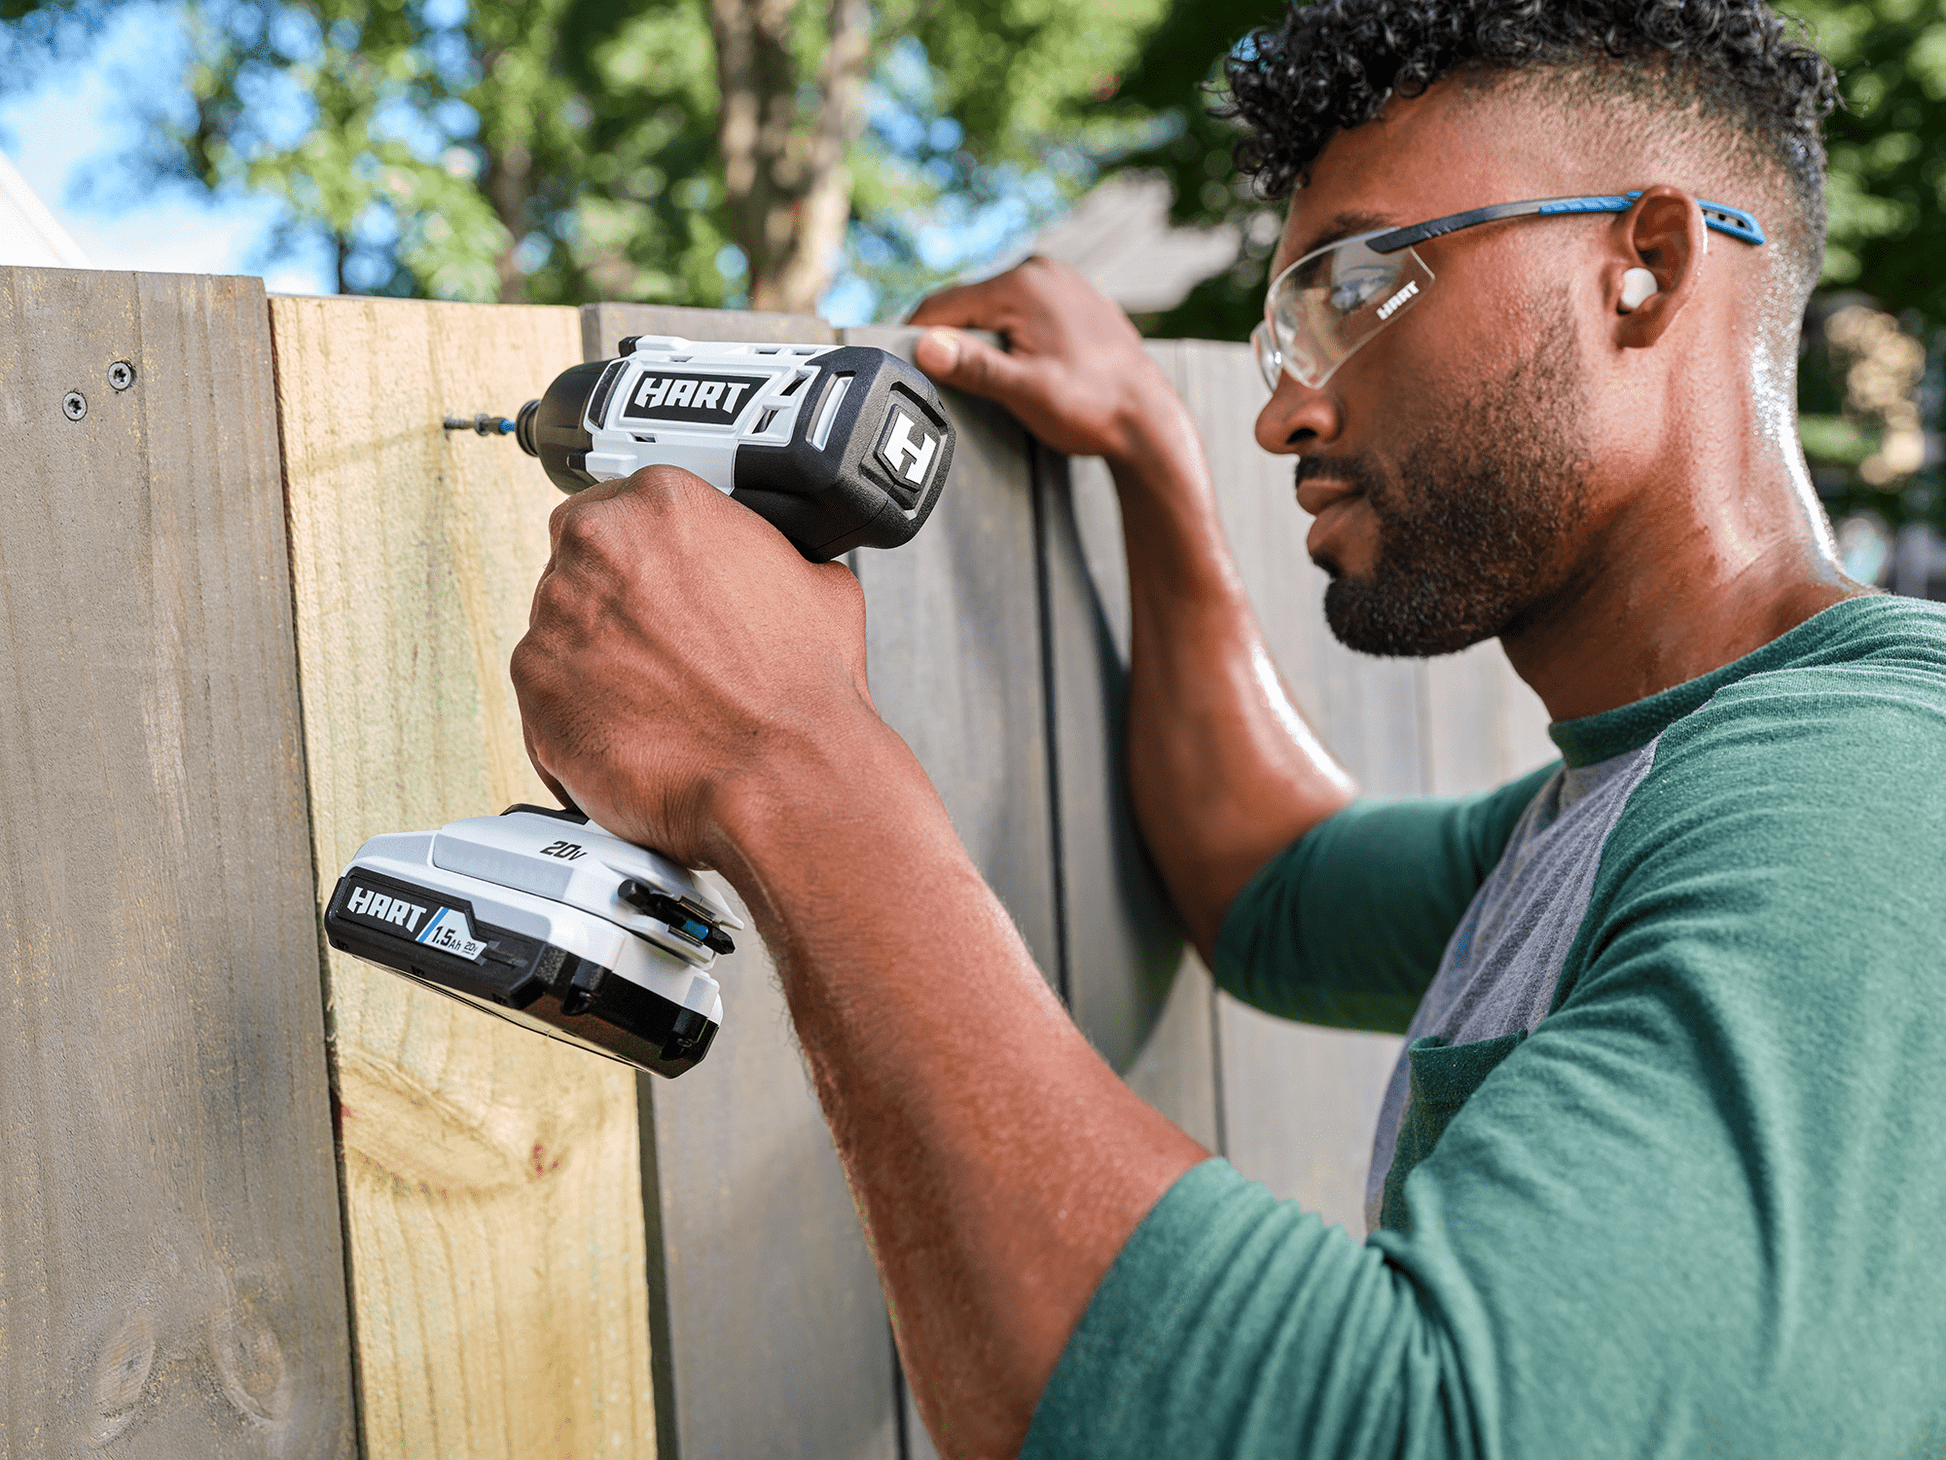 20V 1/4" Cordless Impact Driver (Battery and Charger Not Included)